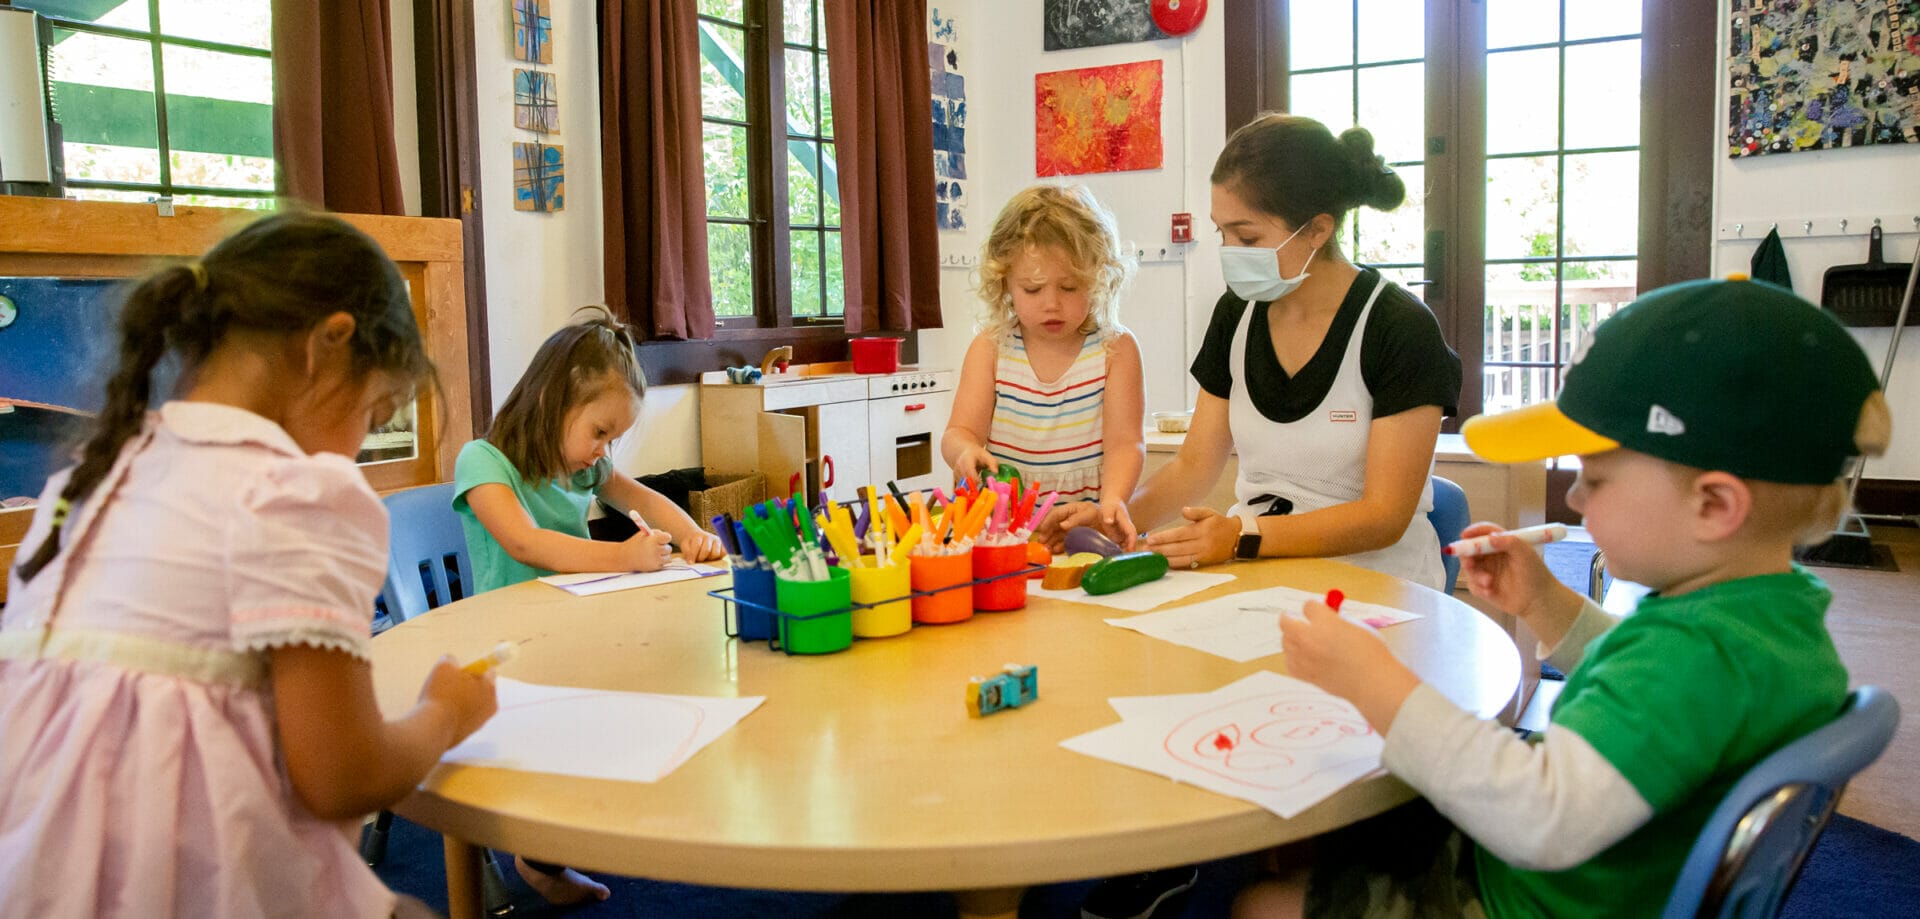 A childcare worker and four children are gathered around a table and drawing on paper.